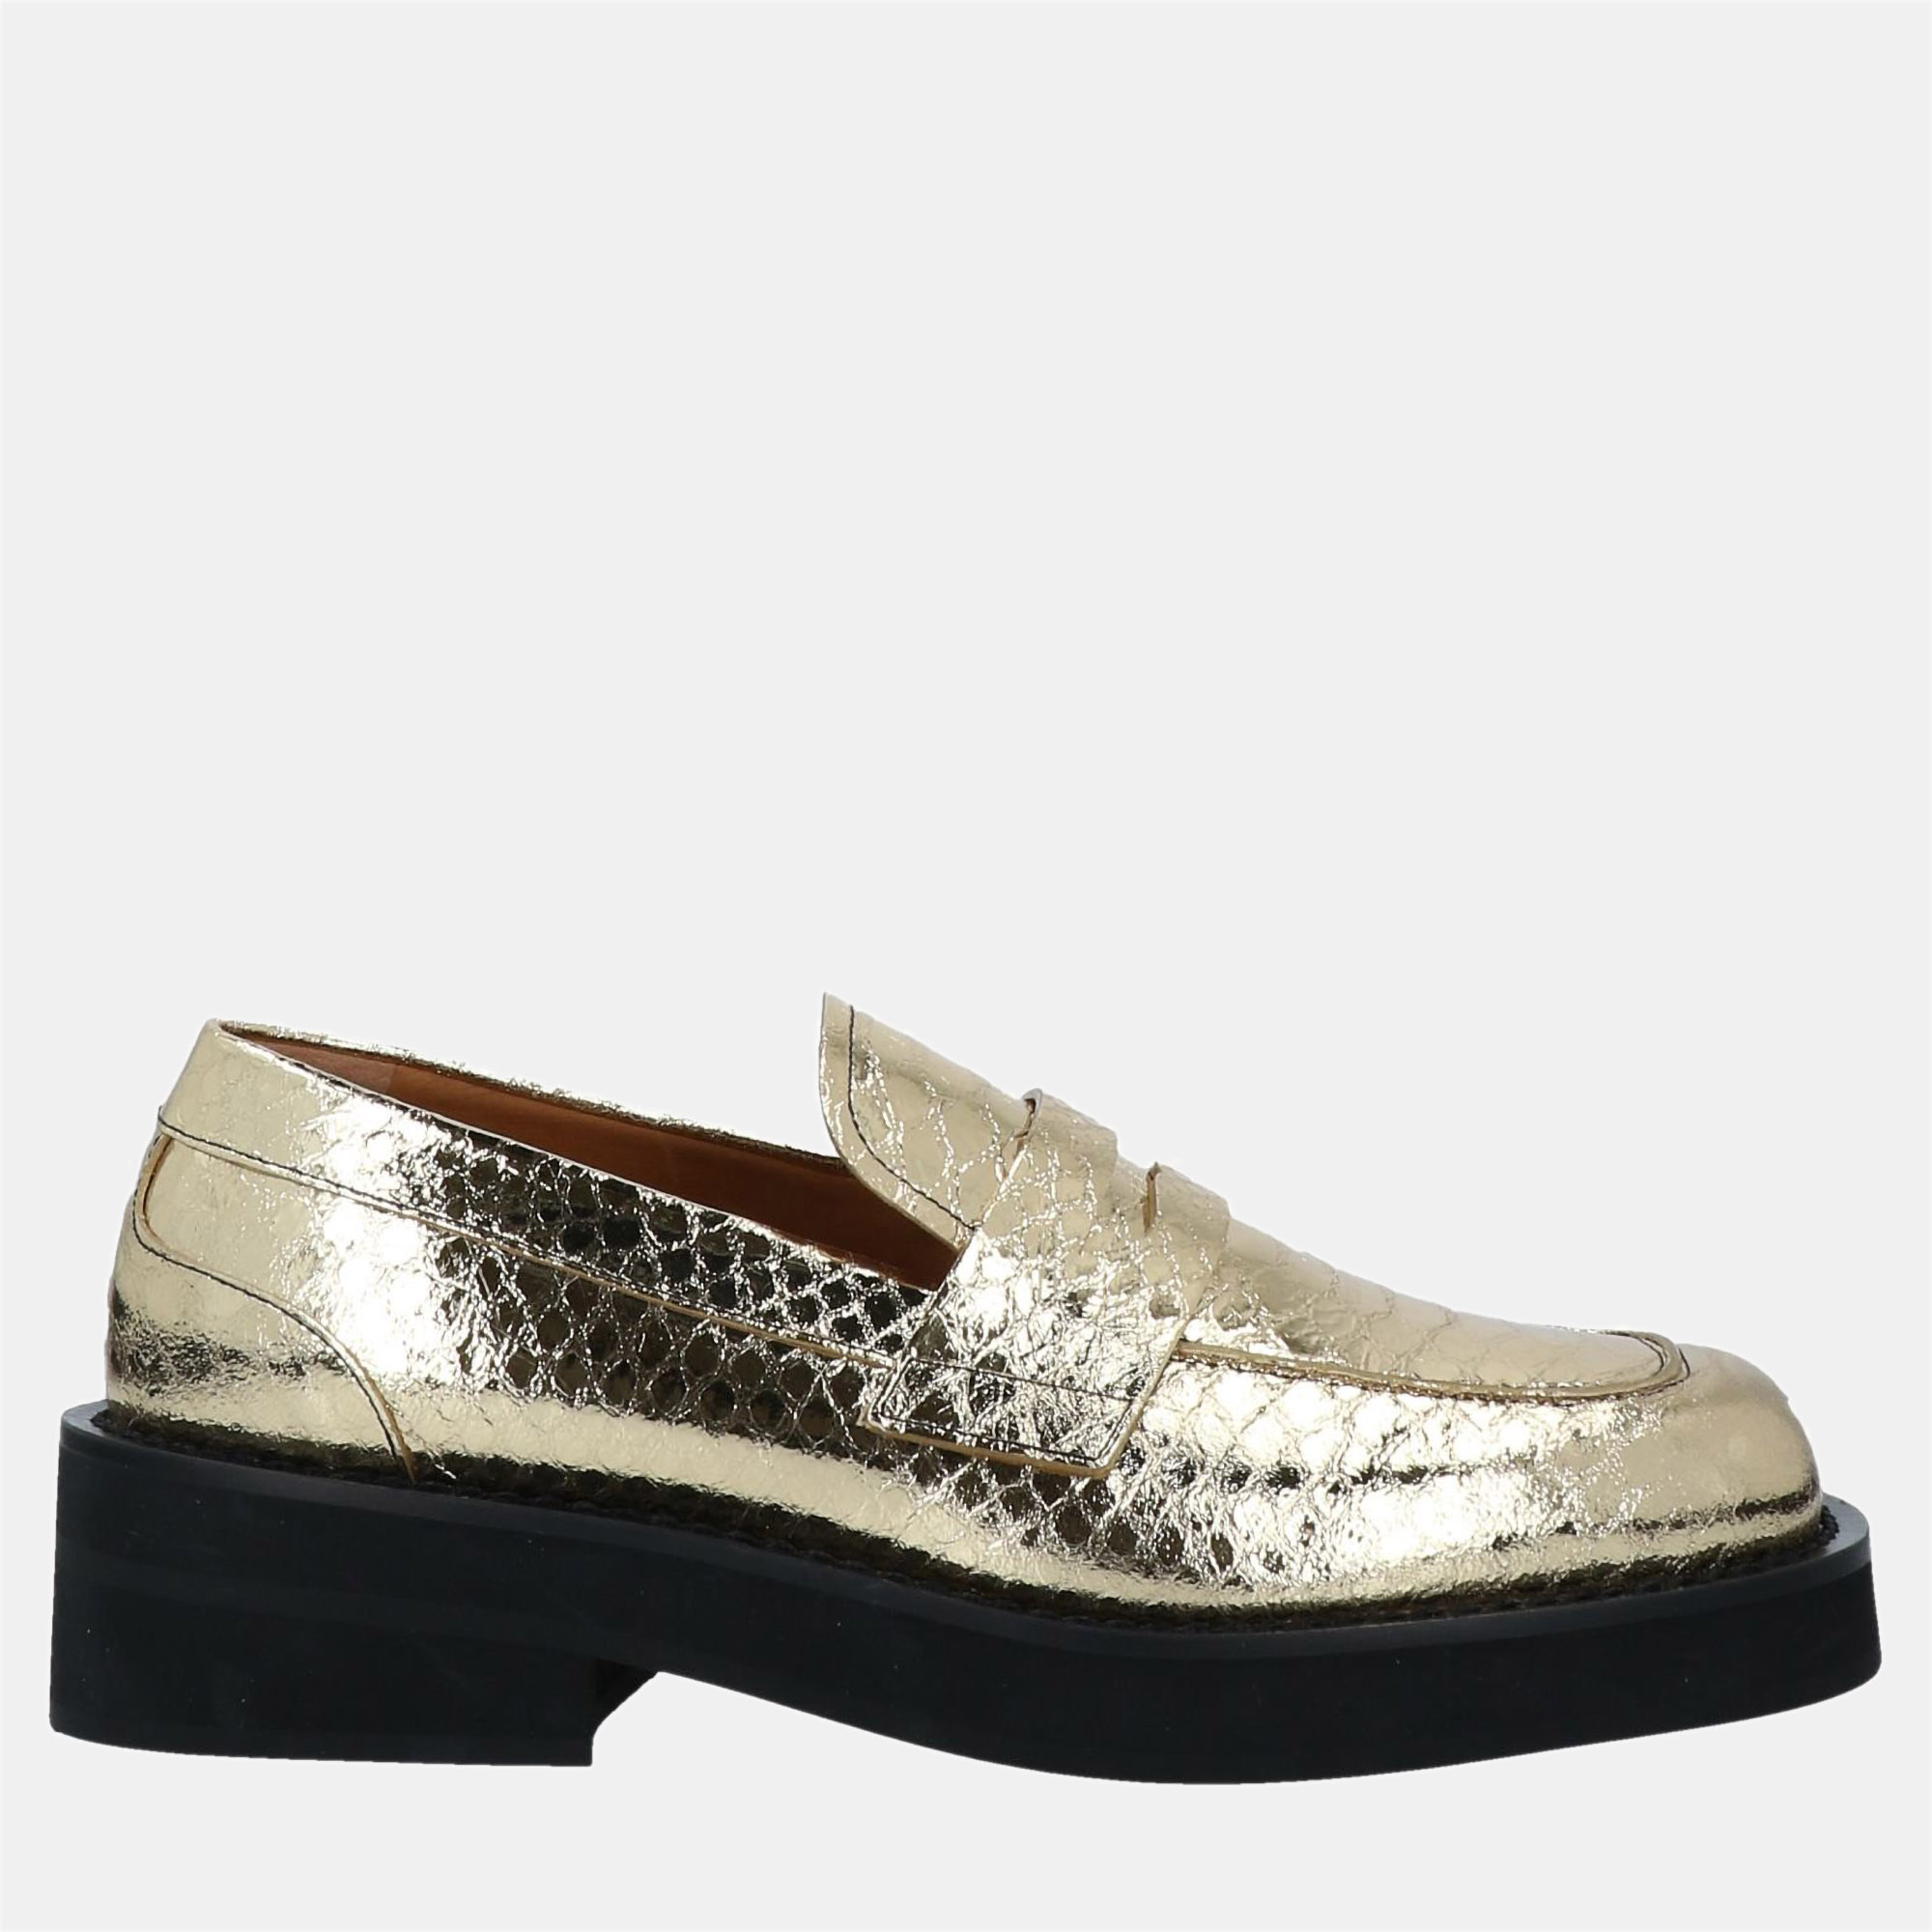 Marni gold snakeskin embossed leather loafers size 35